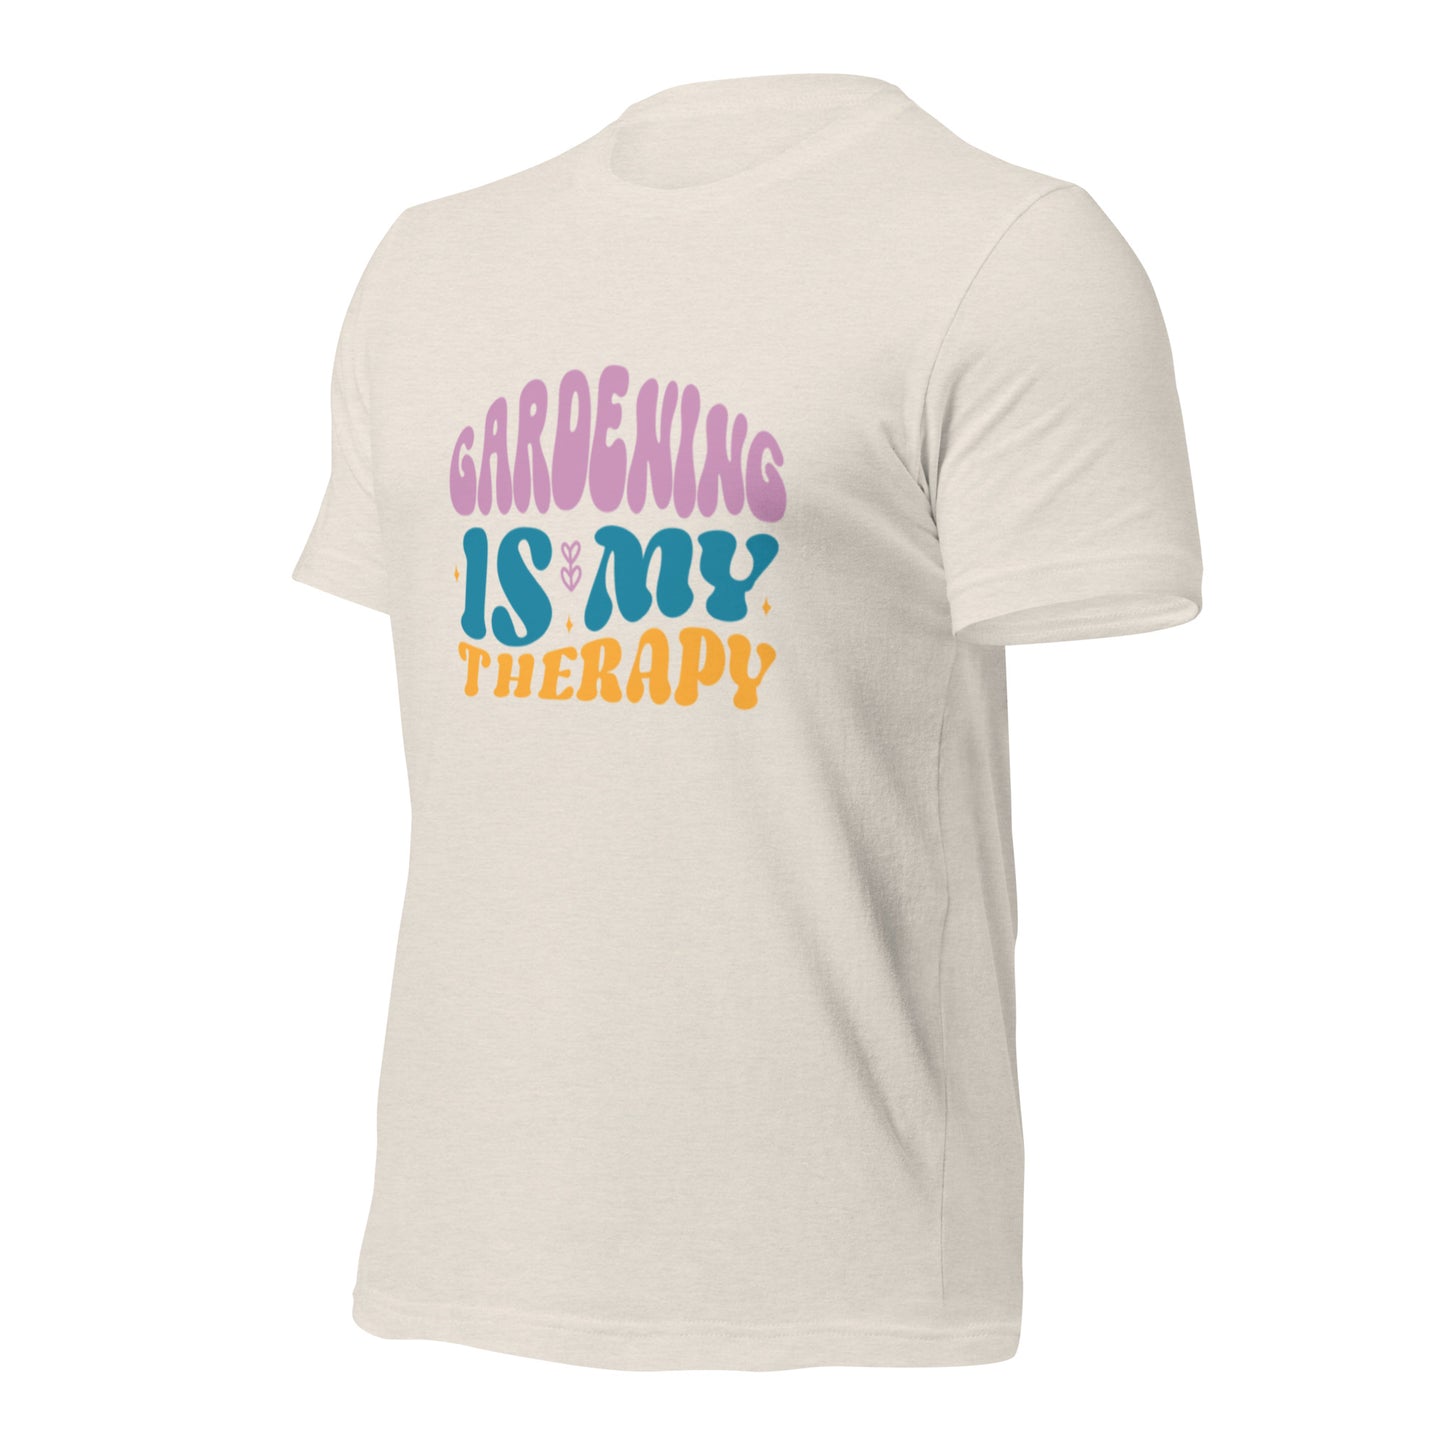 Gardening is my therapy t-shirt